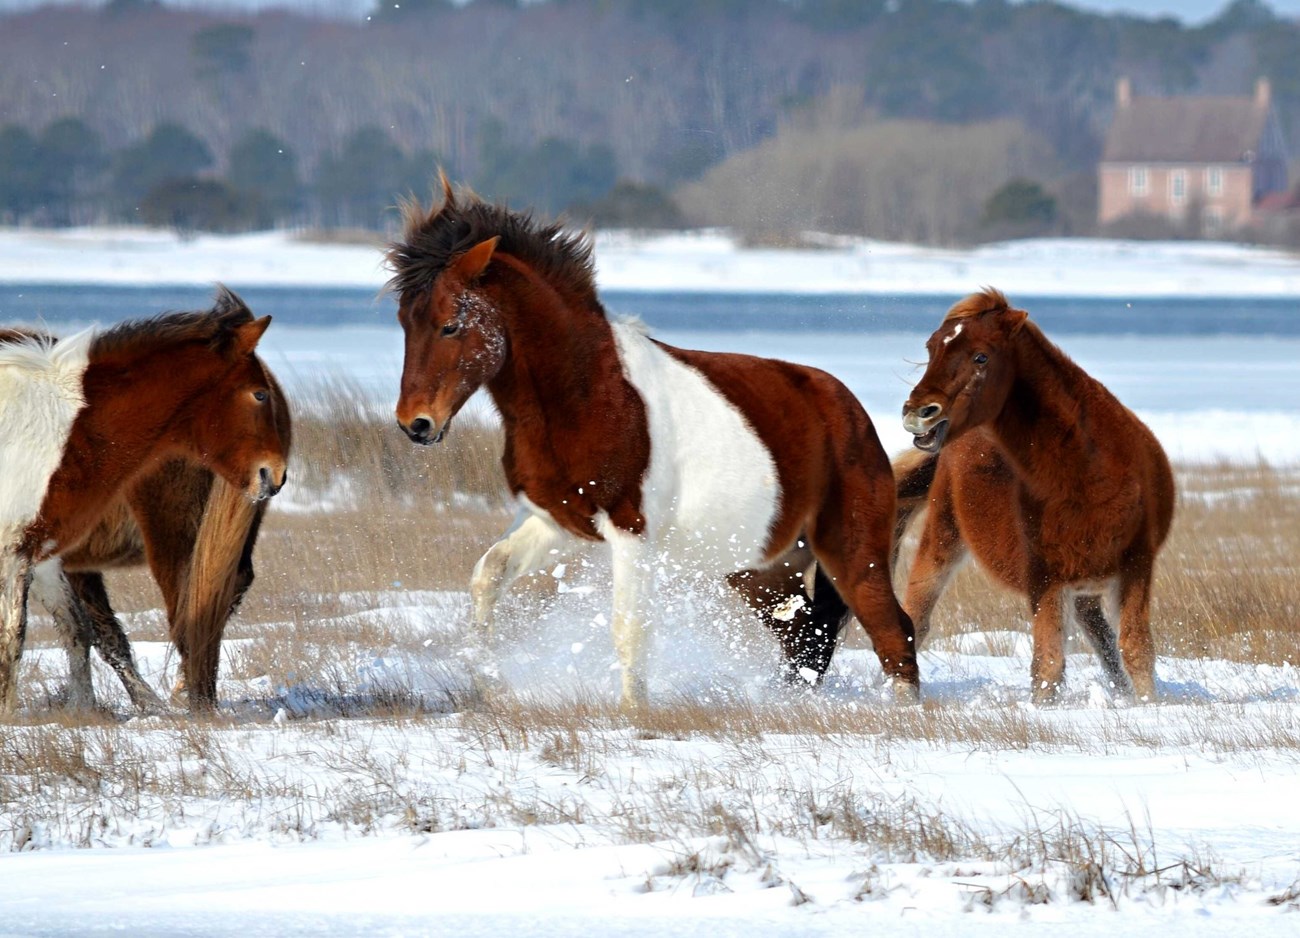 Several ponies play in the snow on a beach